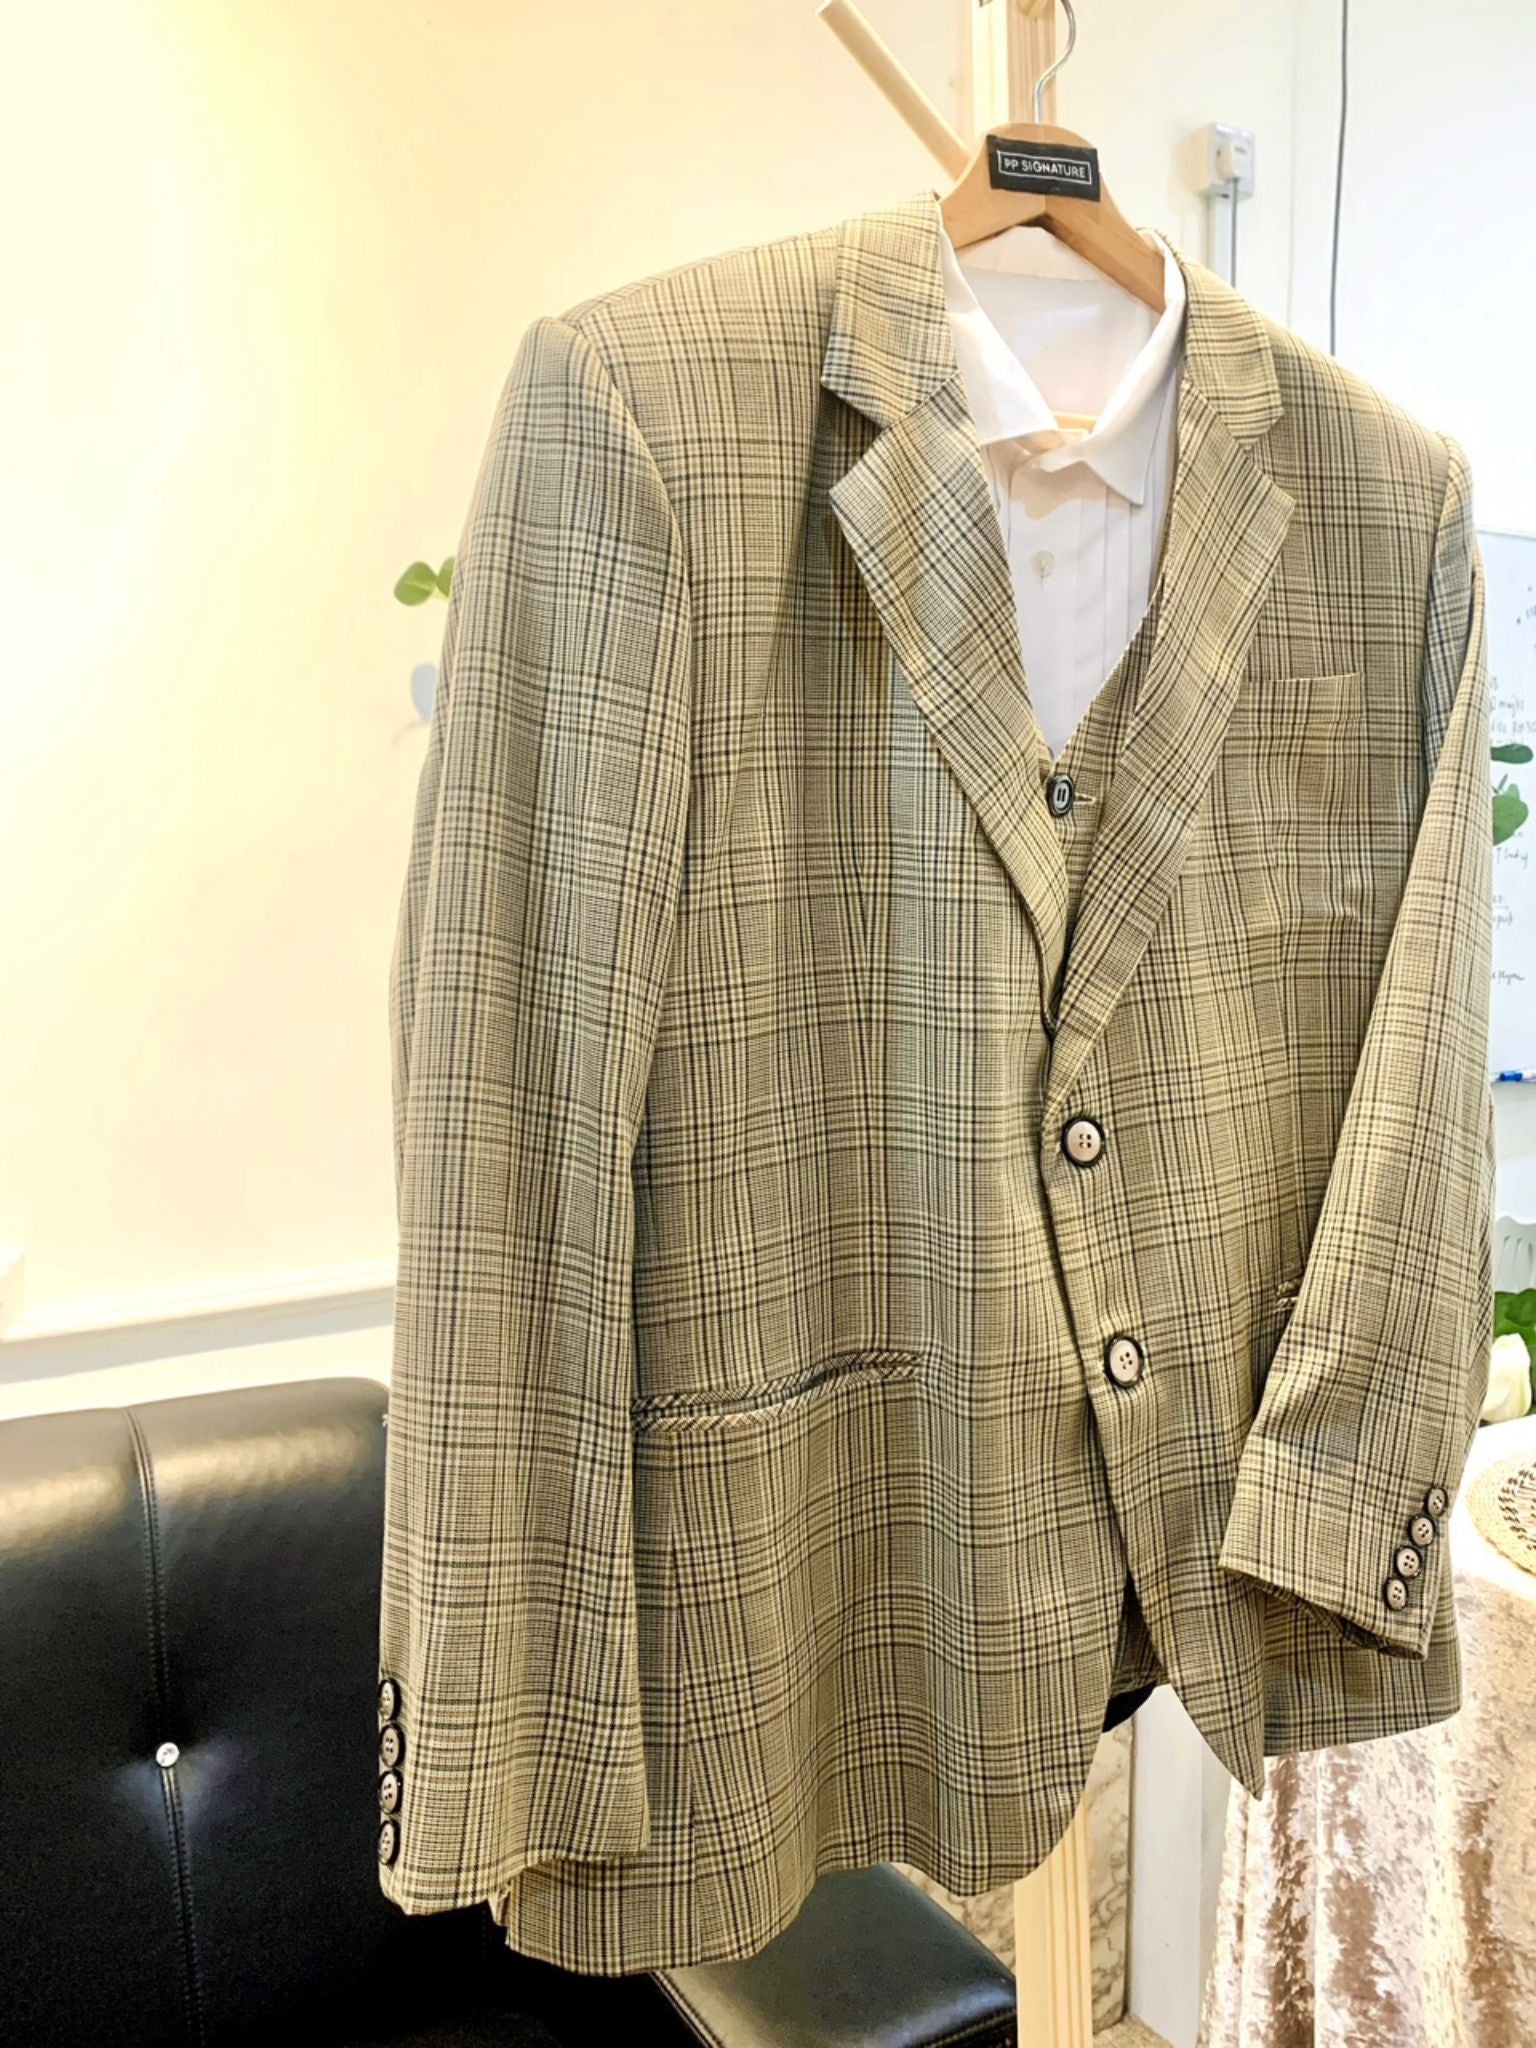 Redefine wedding elegance with our Light Brown Checked 3 Piece Suit. A perfect fusion of style and charm that's sure to leave a lasting impression.